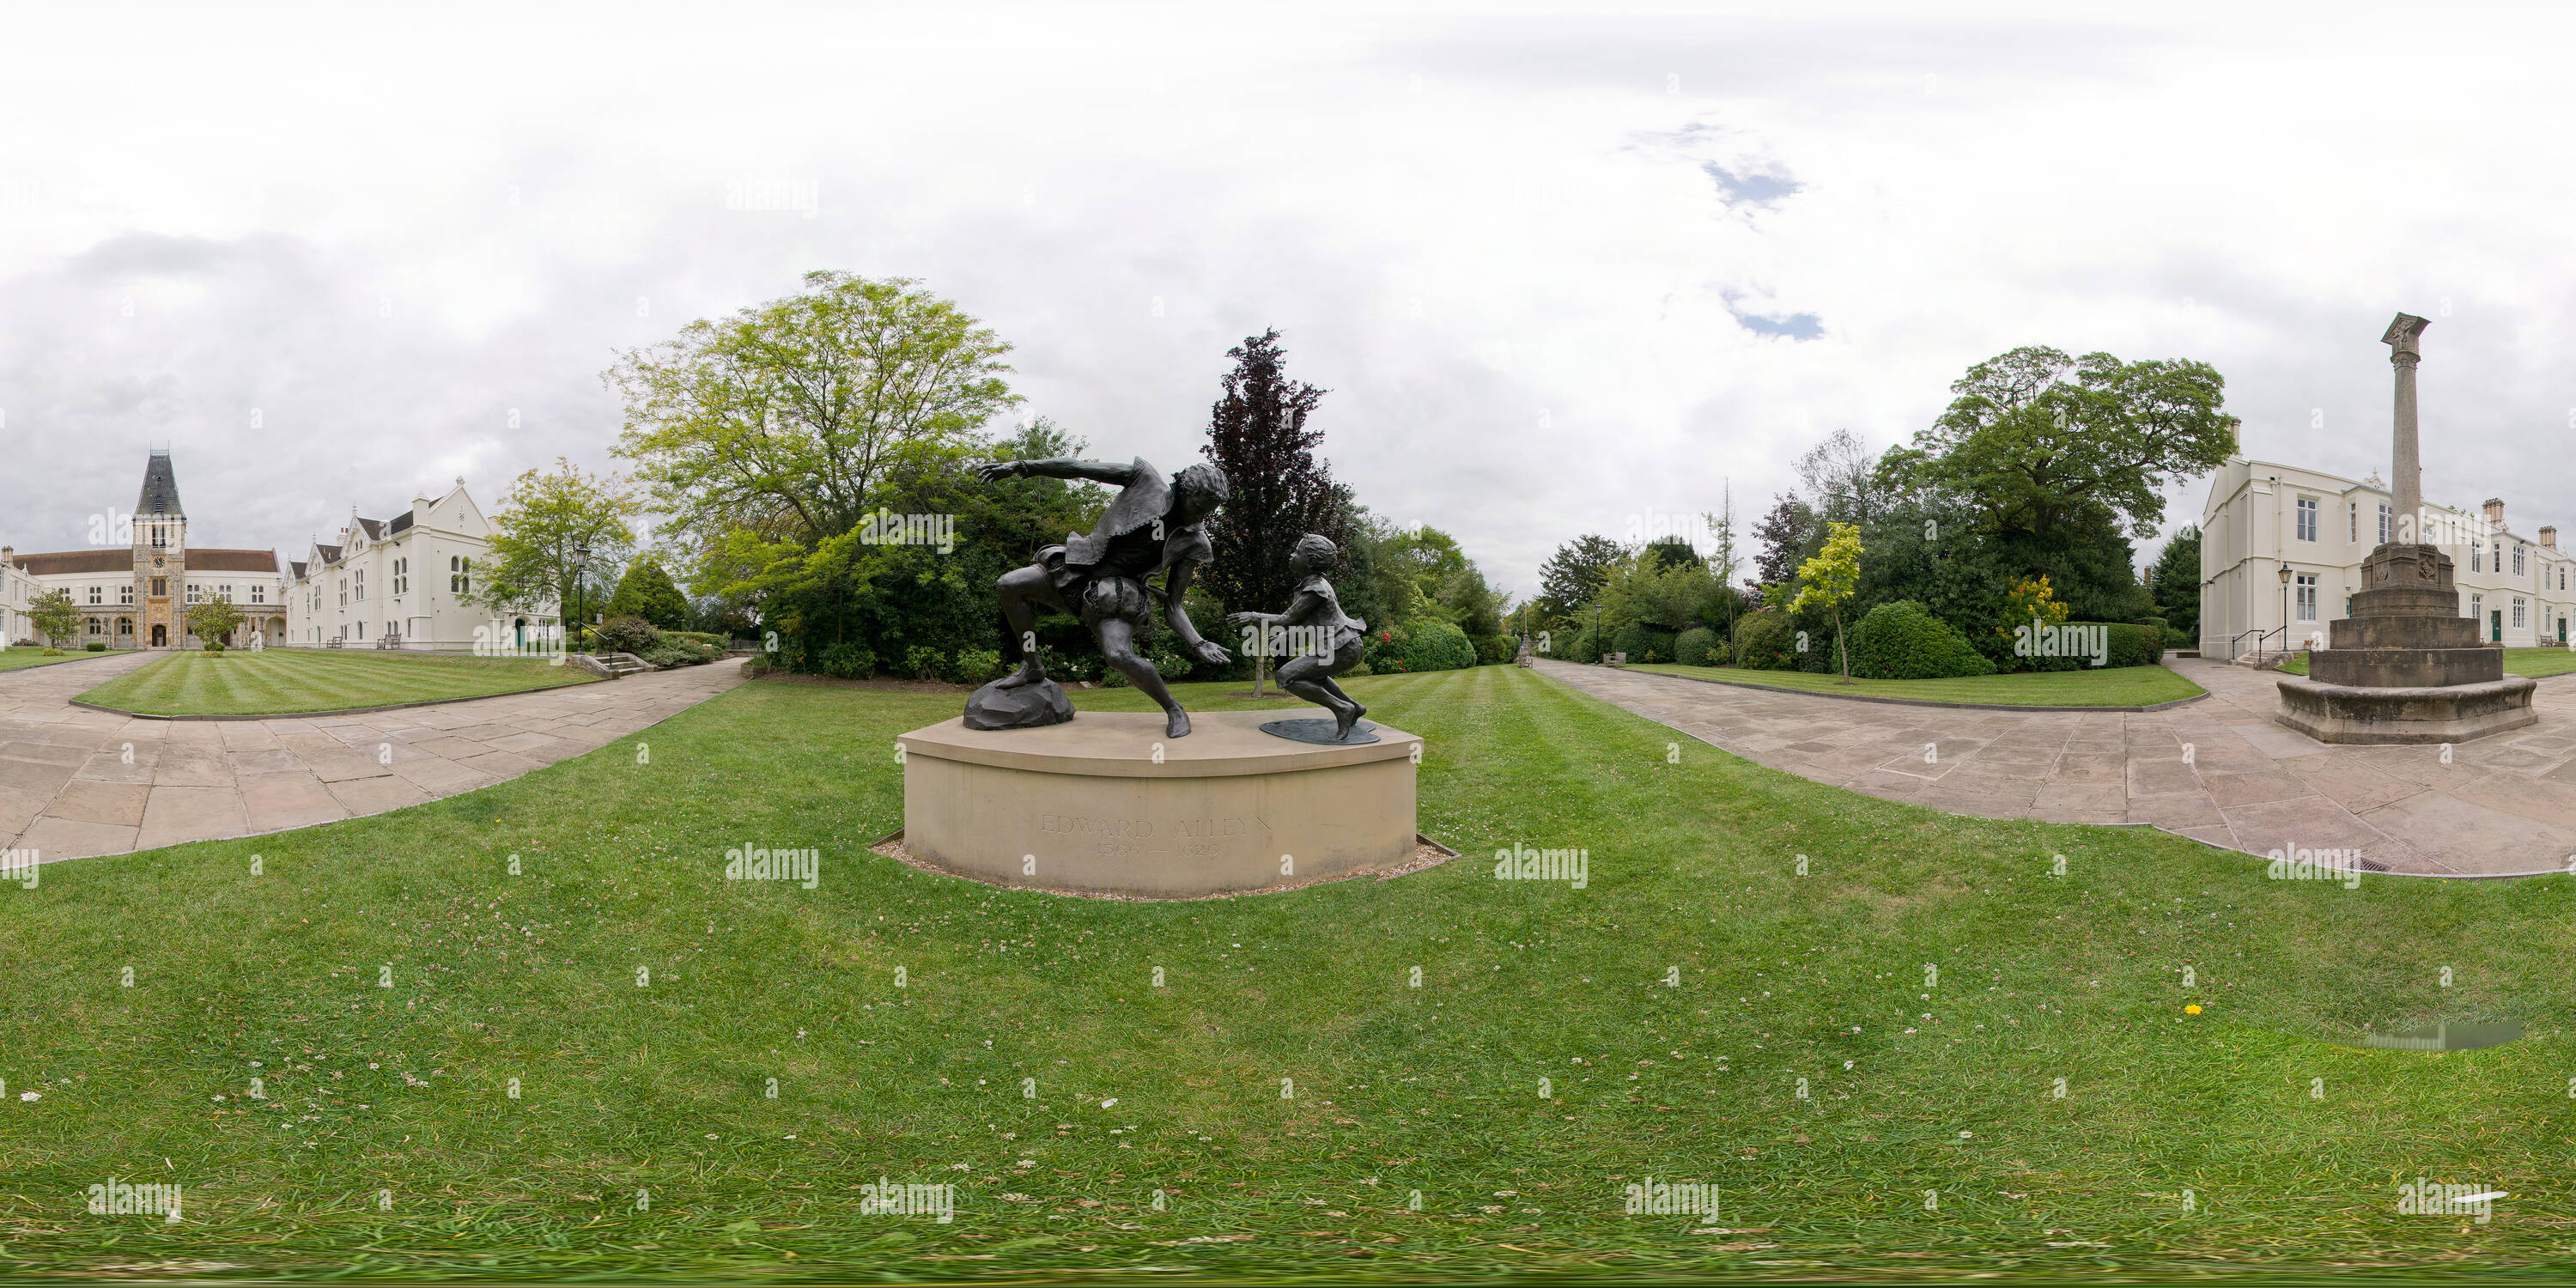 360 degree panoramic view of Statue of Edward Alleyn in Dulwich Village